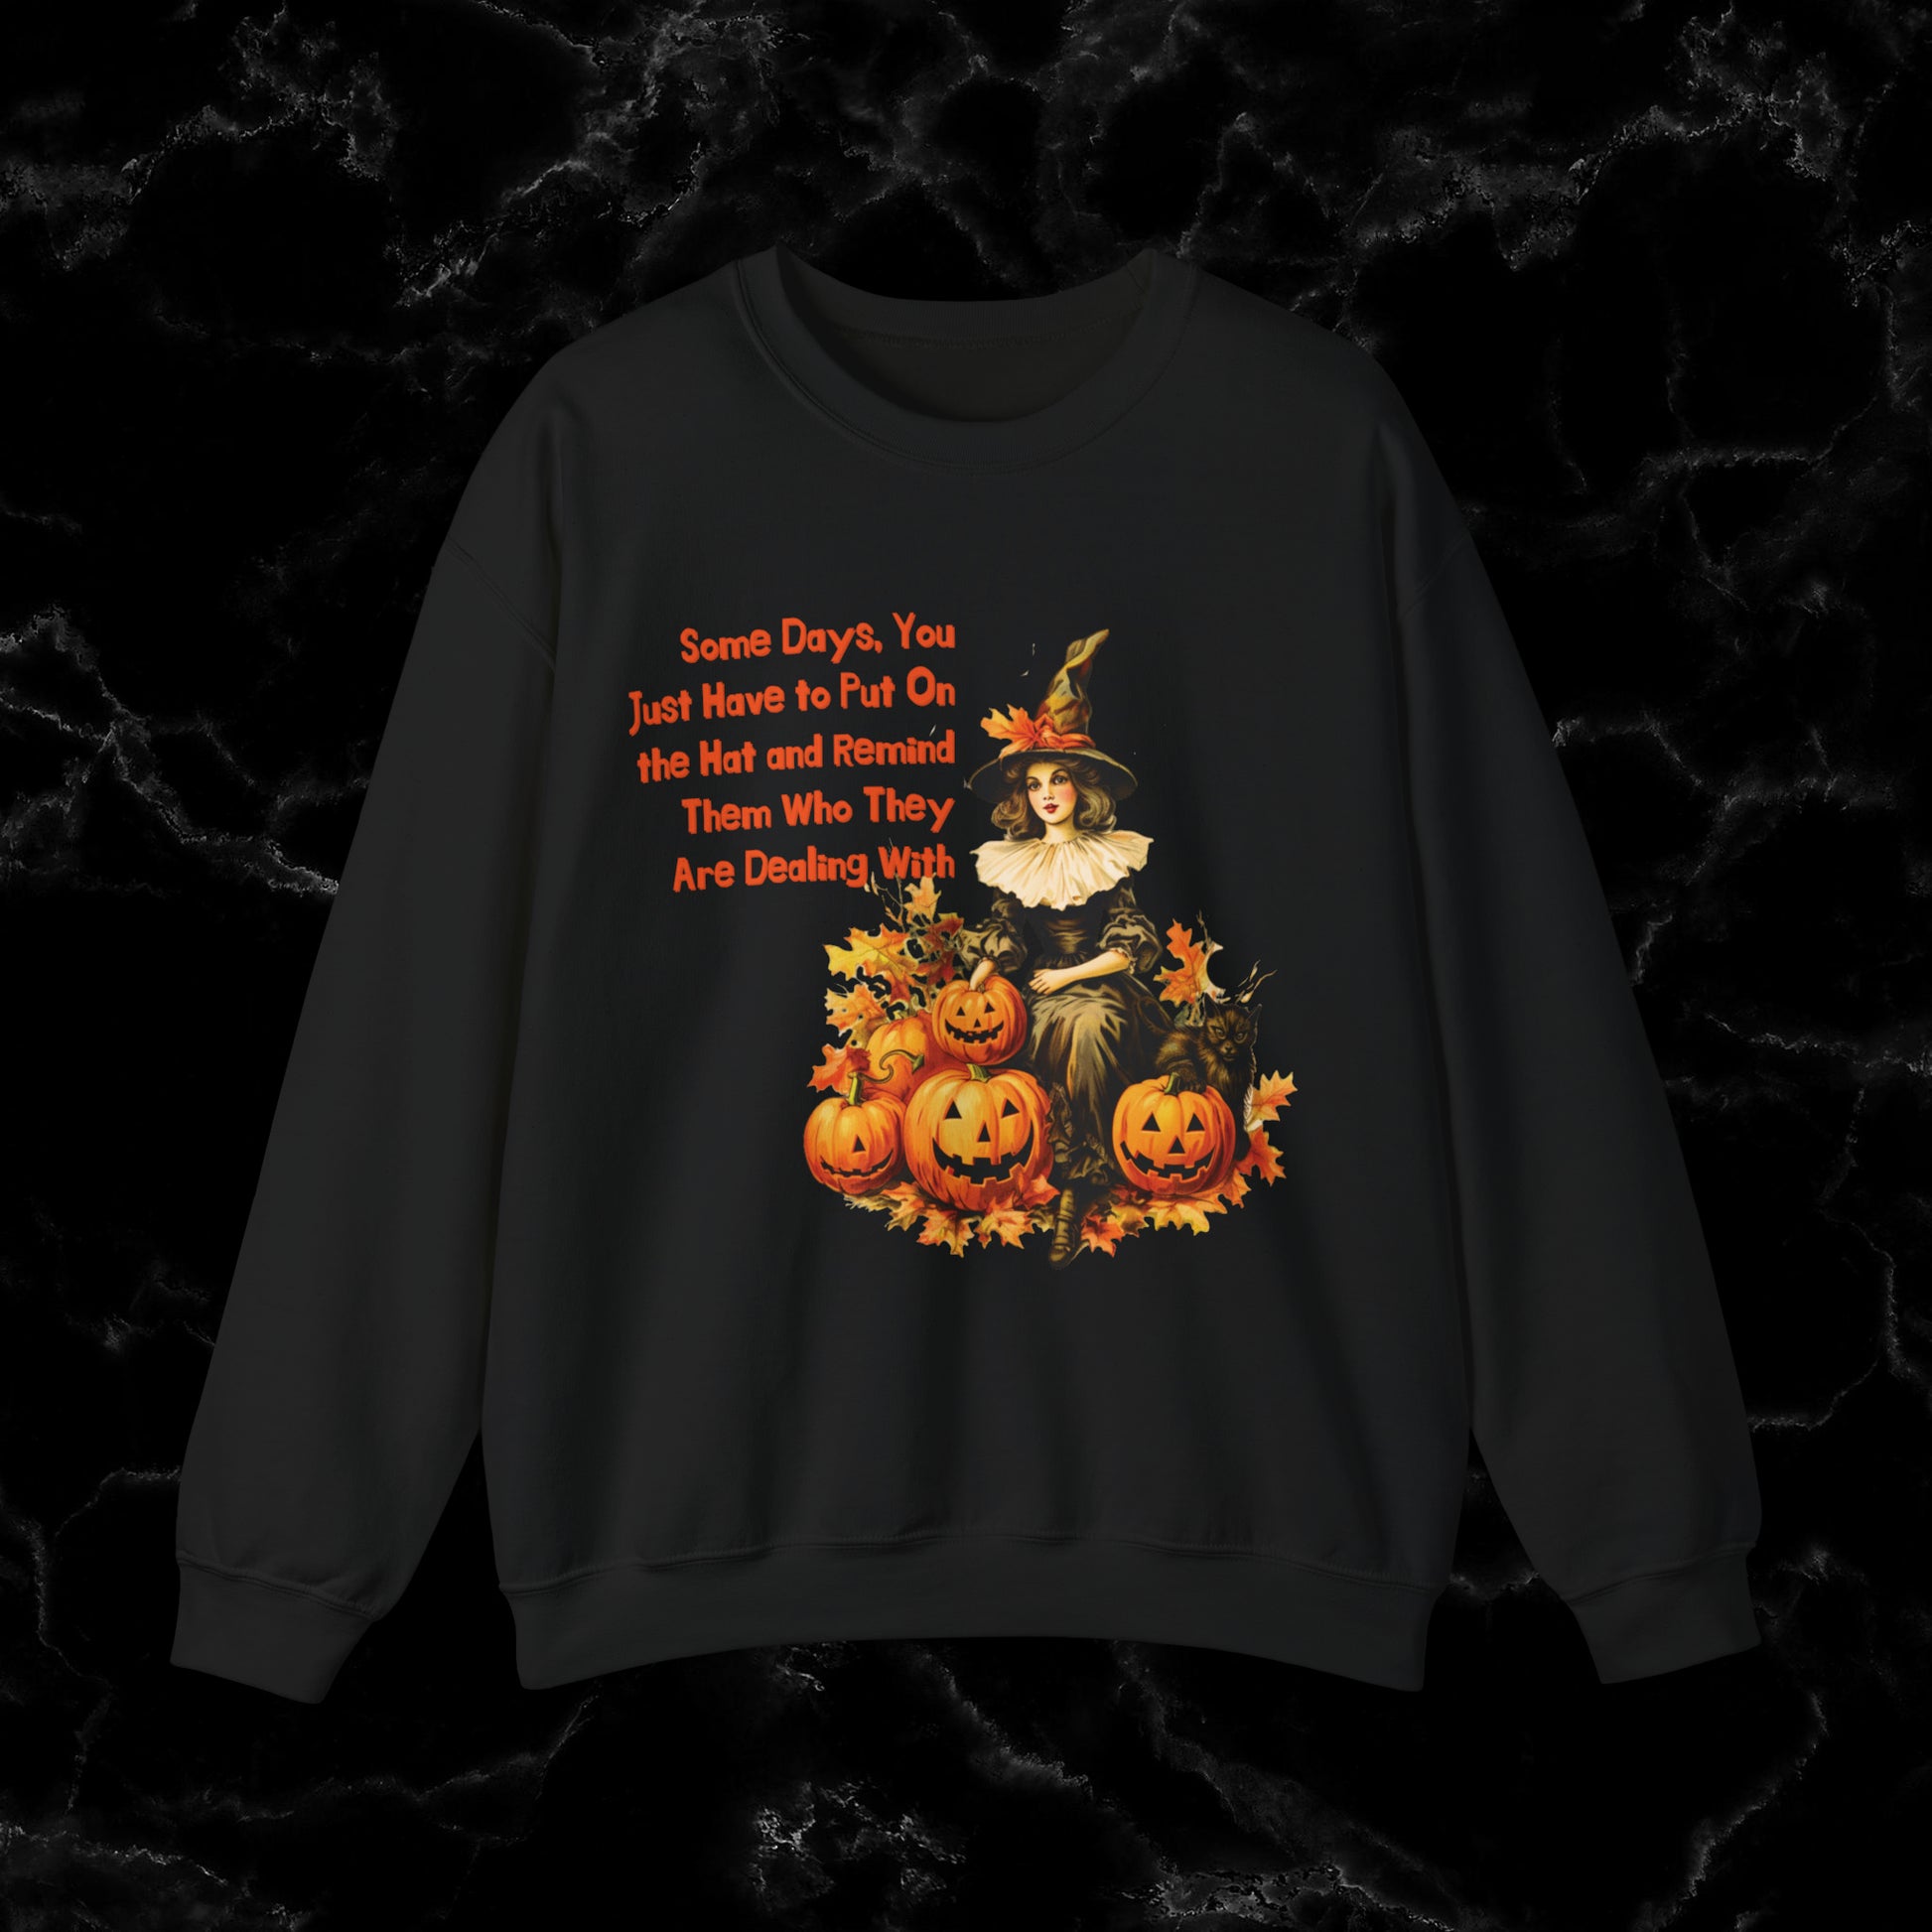 Witch Halloween Gift with Witch Quote - Halloween Sweatshirt - Perfect for Wifes, autunts, Sisters Sweatshirt S Black 